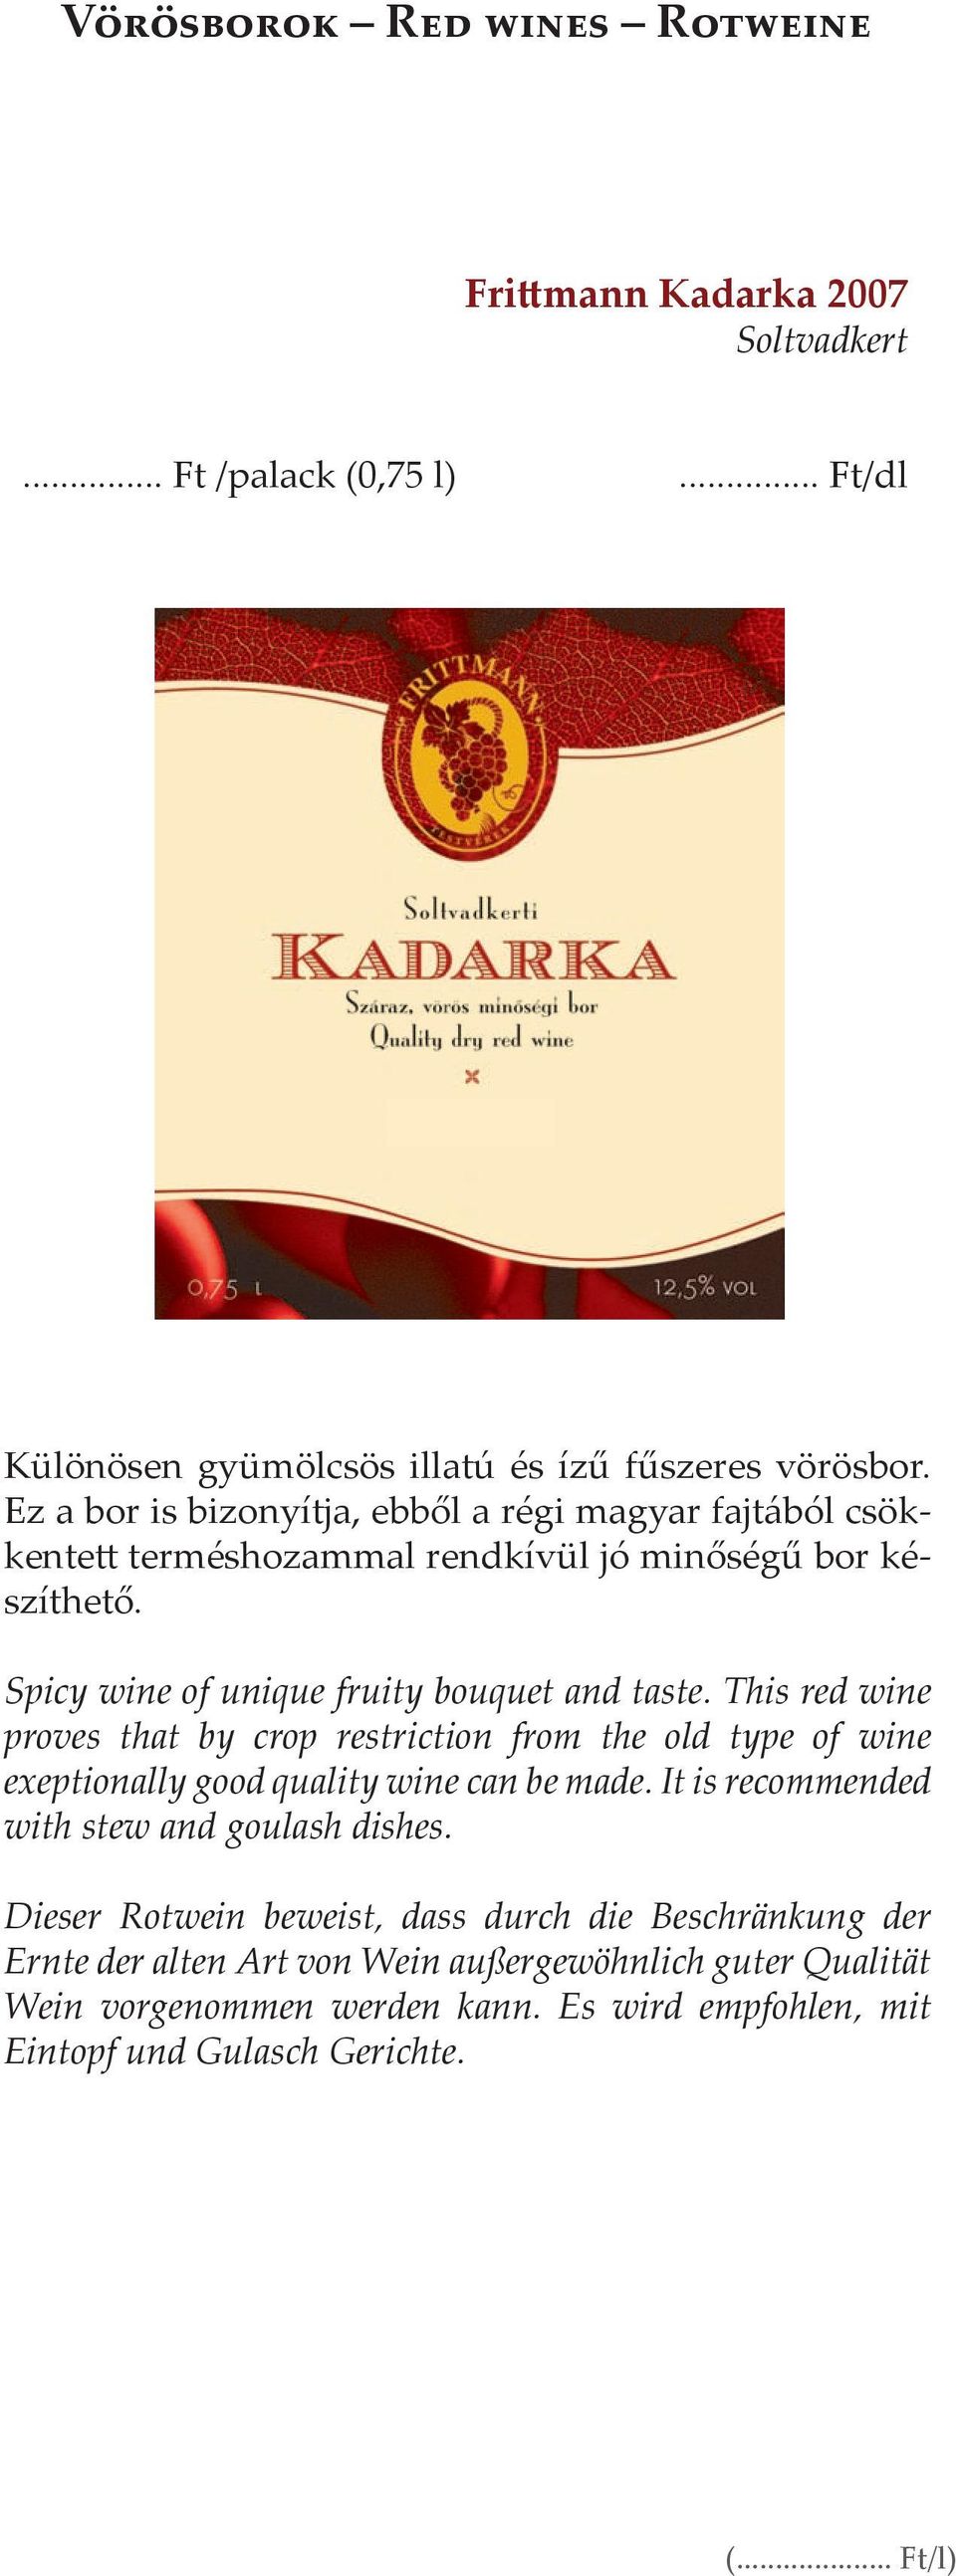 Spicy wine of unique fruity bouquet and taste. This red wine proves that by crop restriction from the old type of wine exeptionally good quality wine can be made.